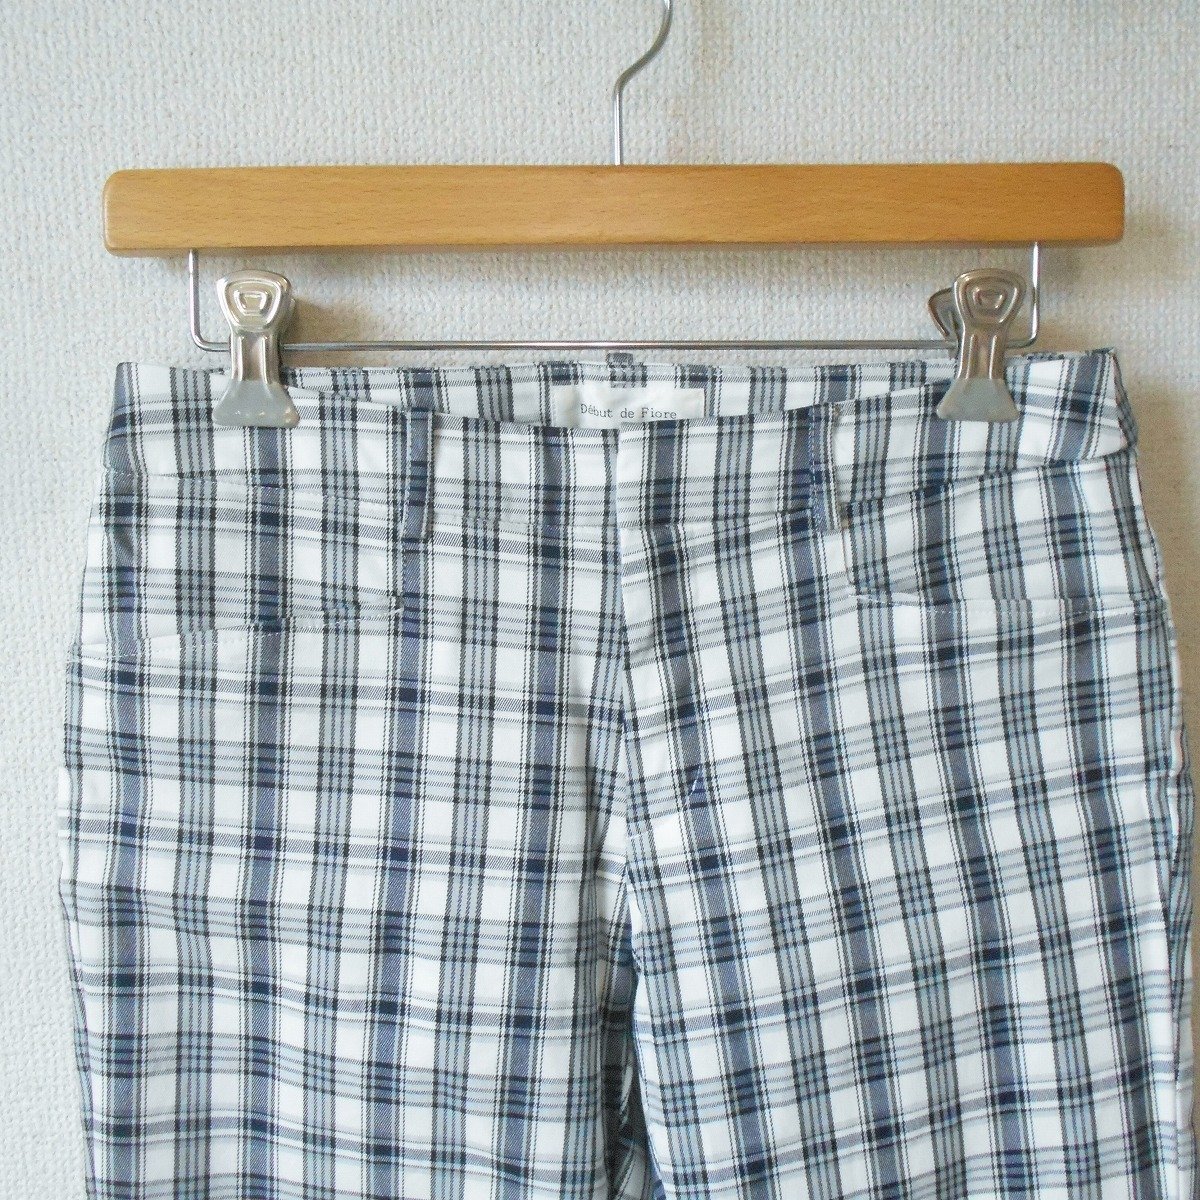  debut dofioreDebut de Fiore 7 minute height cropped pants 38 lady's check spring summer Laisse Passe 